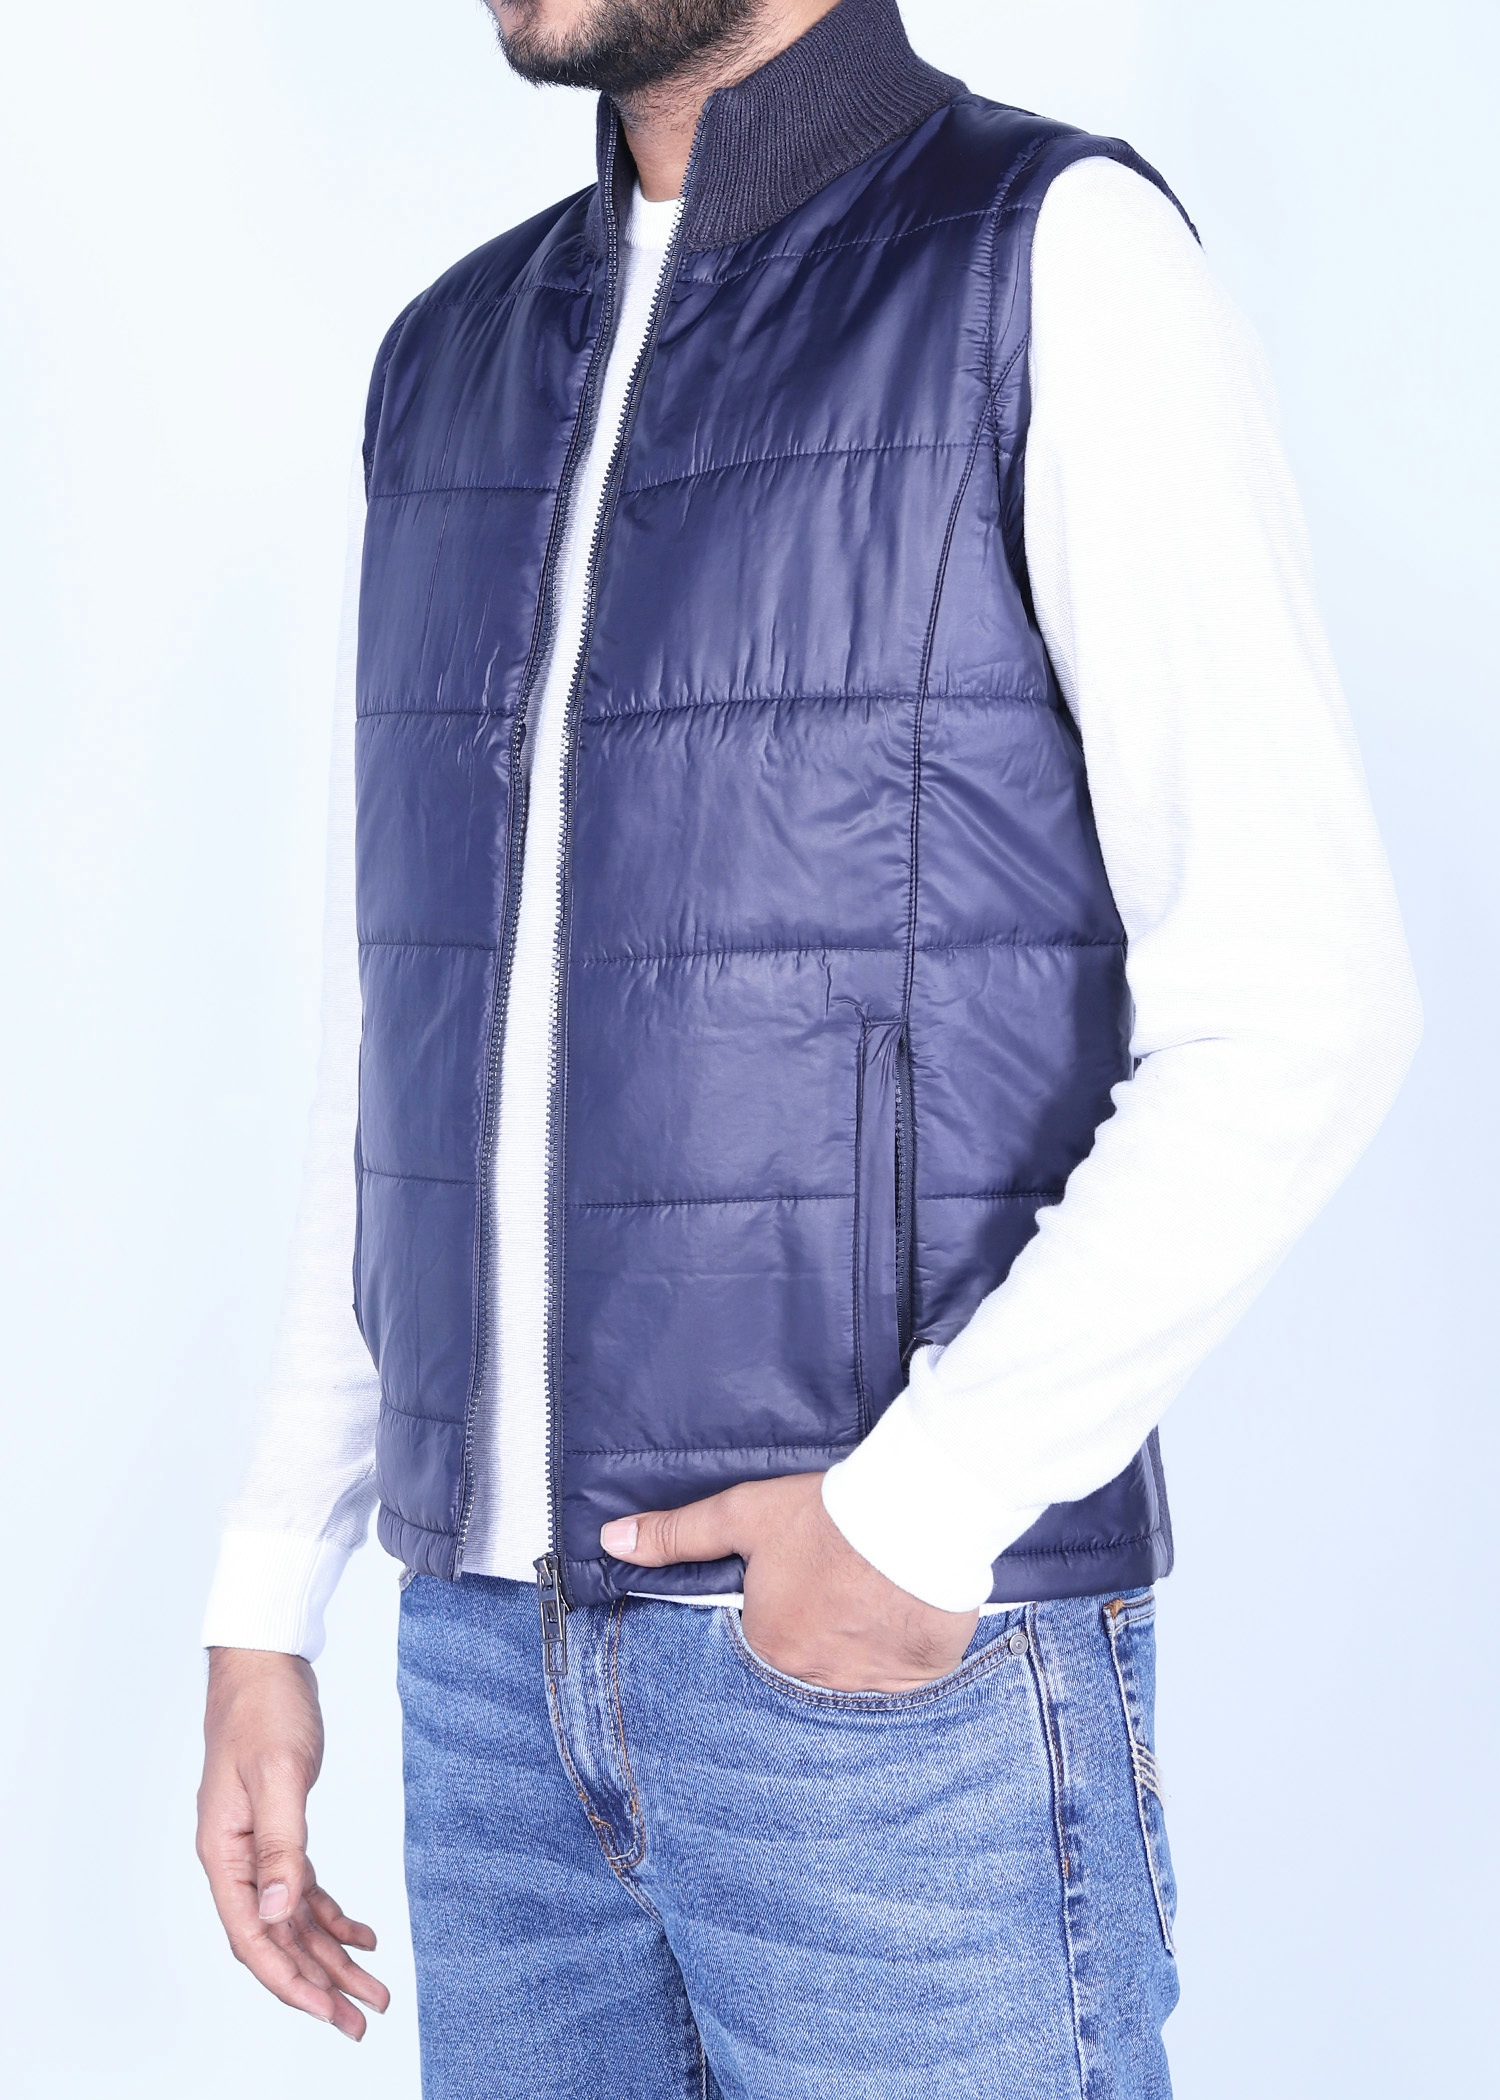 frogmouth vest navy color half side view